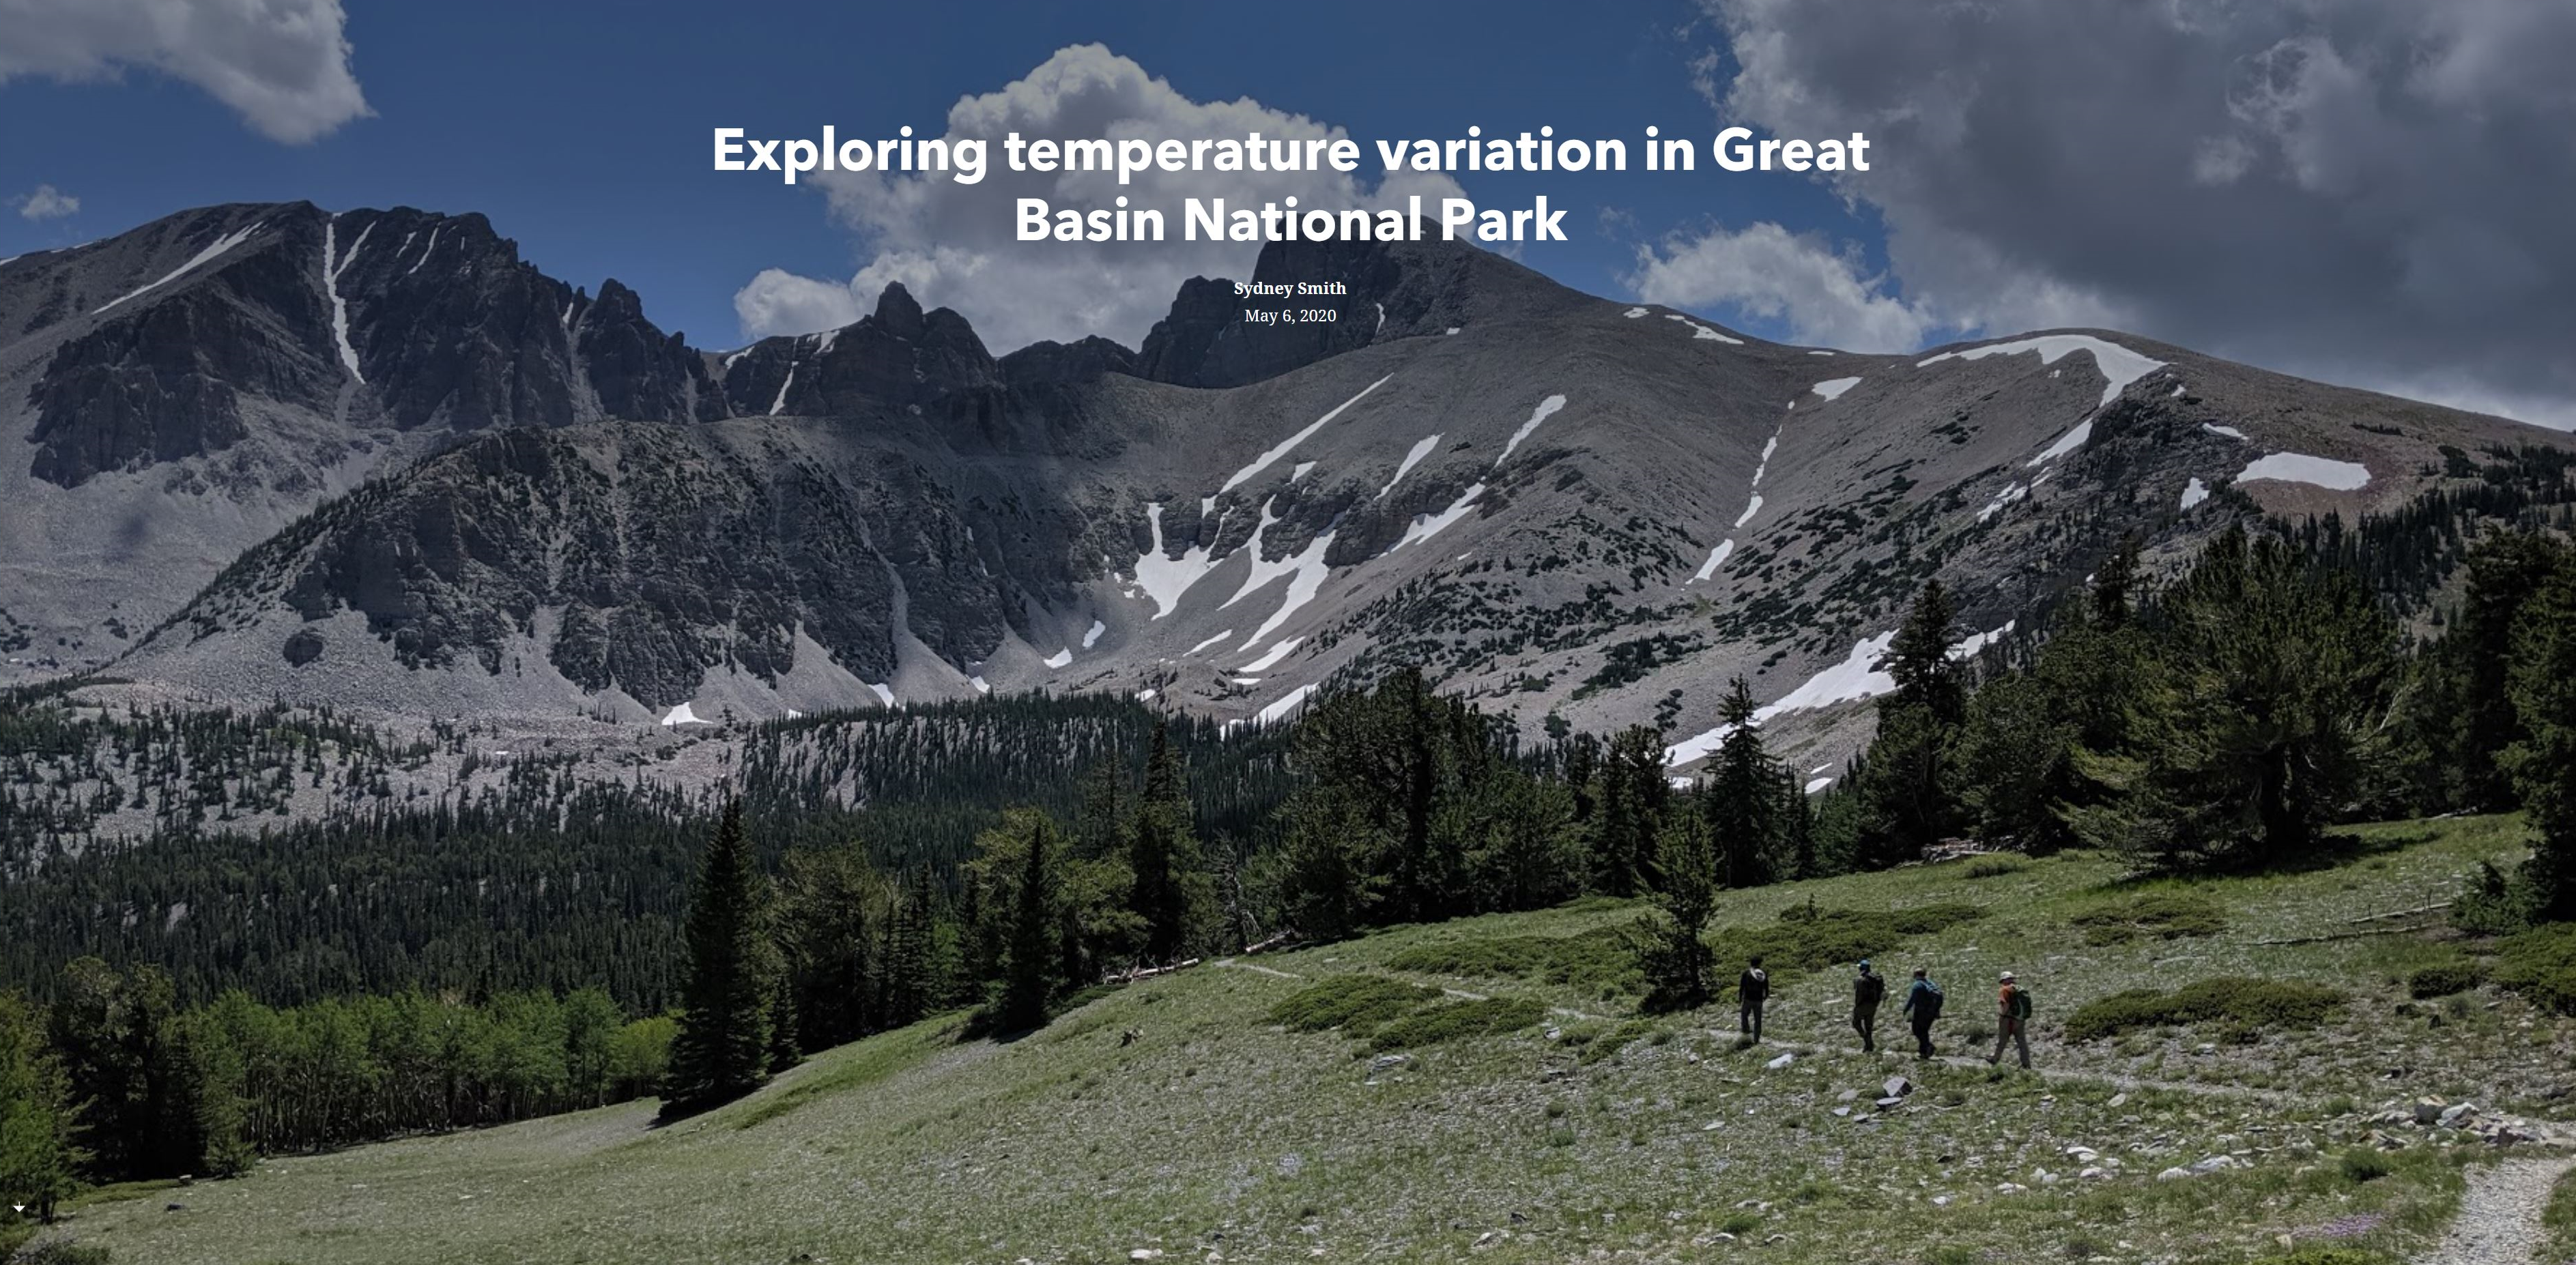 Four people walking down a path in a valley surrounded by mountains with snow patches and pine trees  under blue skies and white clouds. Text on image: Exploring temperature variation in Great Basin National Park Sydney Smith  May 6, 2020